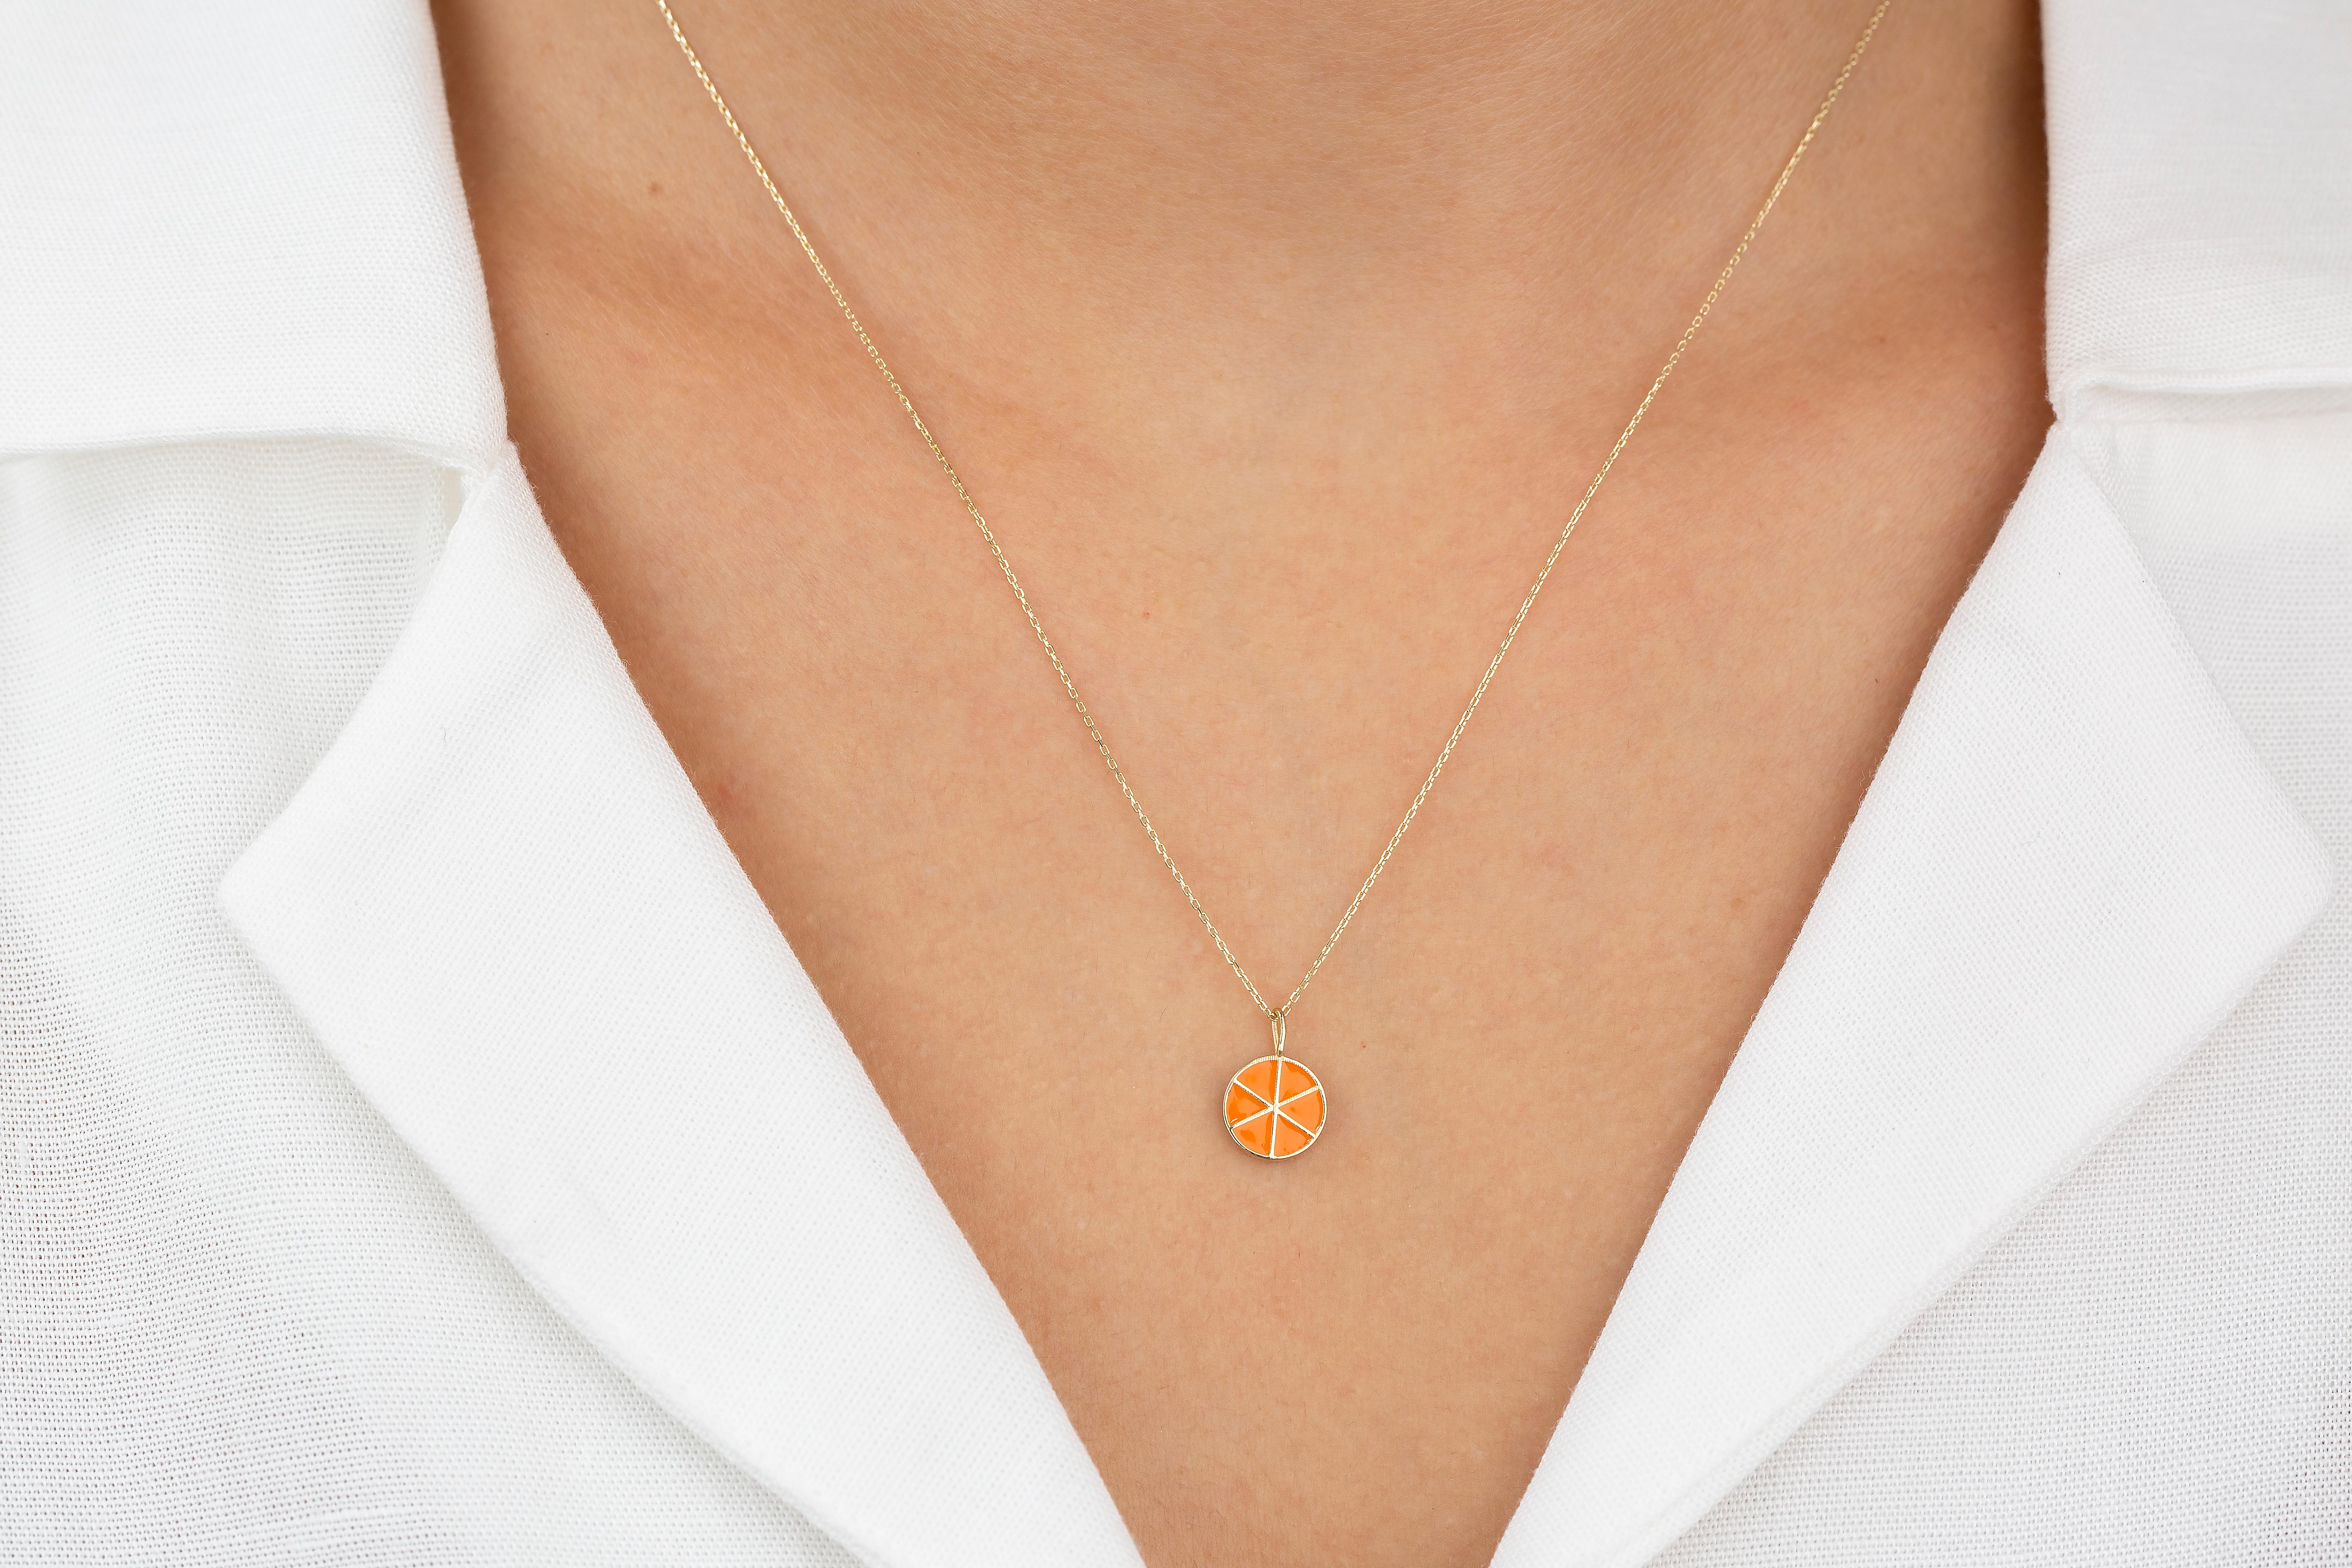 14K Gold Orange Necklace - Enamel Fruit Necklace

Special desing necklace with enamel. It’s a manual labour product. ‘Handmade’. Fashionable product. 

This necklace was made with quality materials and excellent handwork. I guarantee  the quality